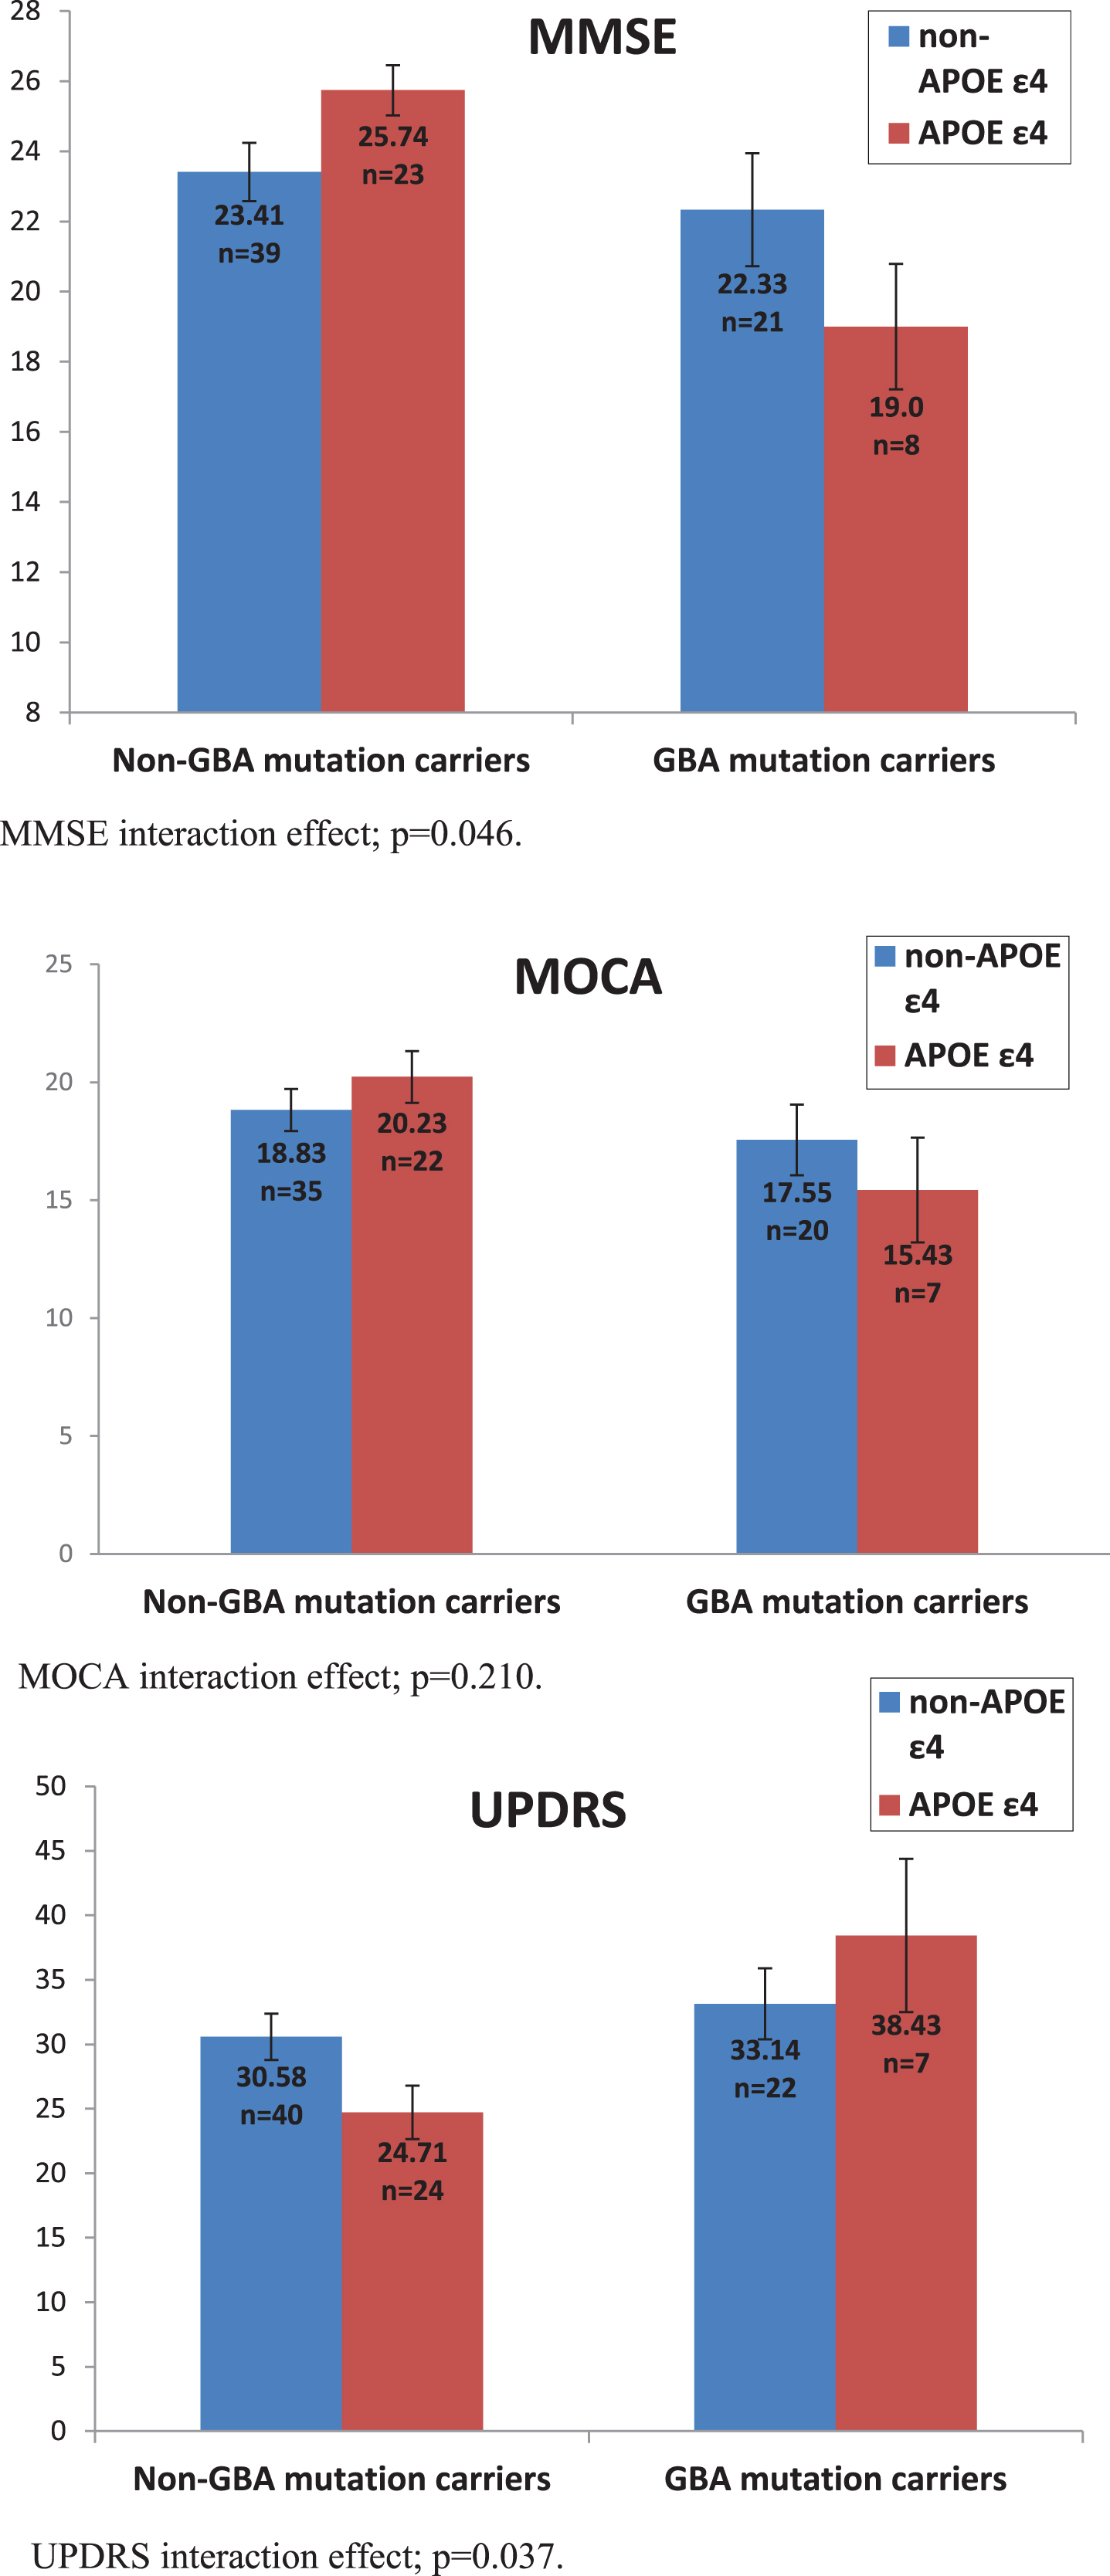 Effect of GBA mutations and APOE ɛ4 polymorphisms on MMSE, UPDRS, and MOCA scores. MMSE interaction effect; p = 0.046. MOCA interaction effect; p = 0.210. UPDRS interaction effect; p = 0.037.